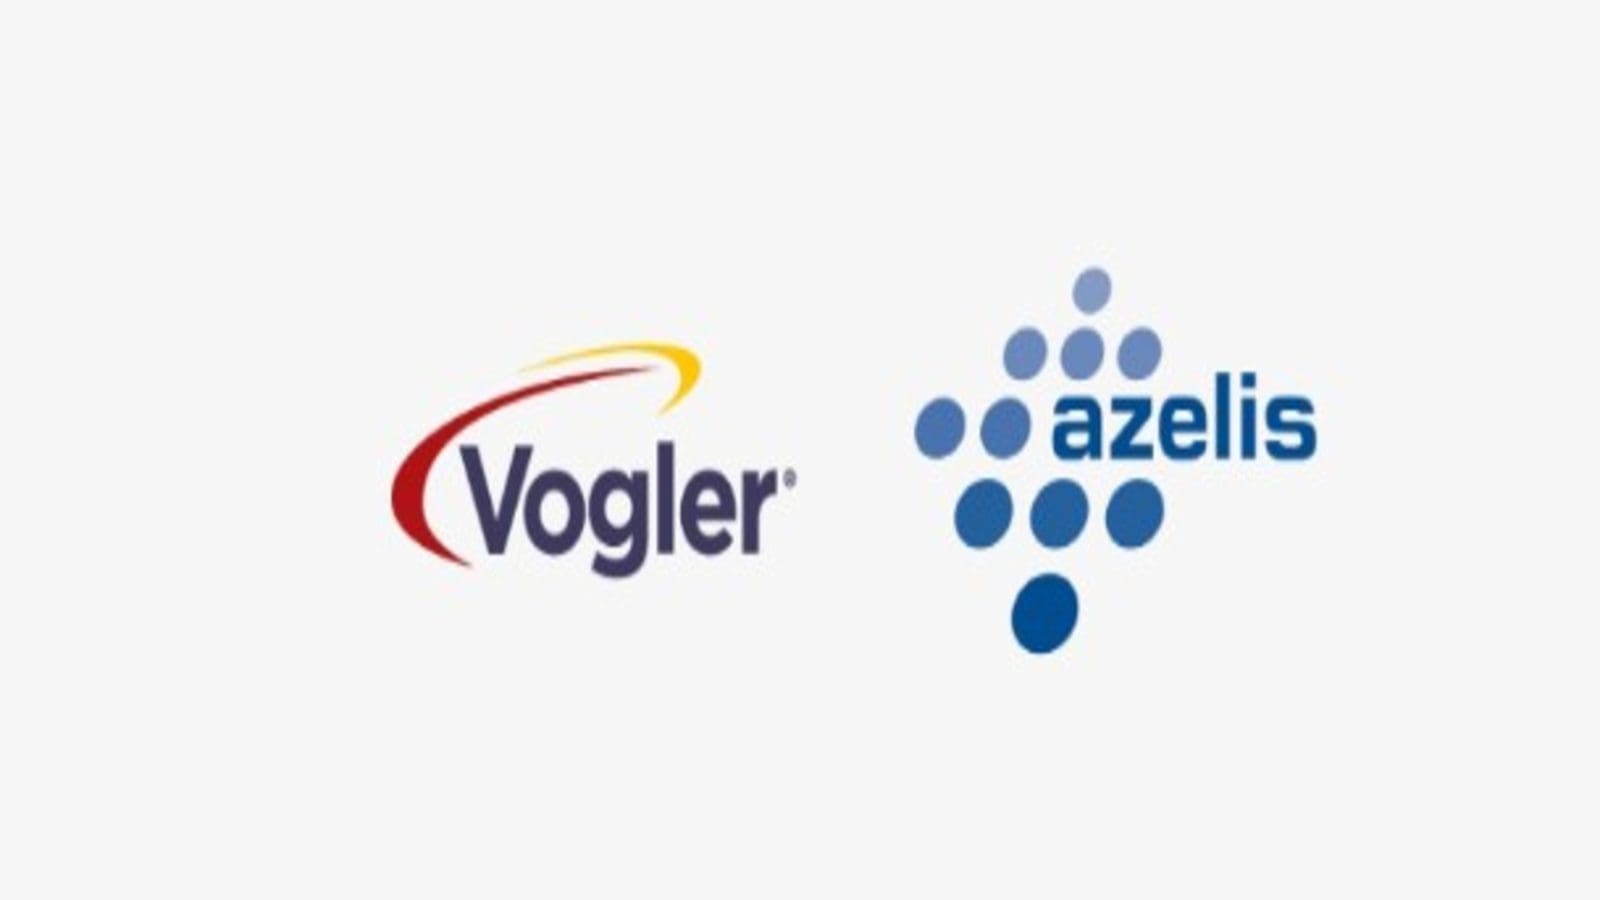 Azelis deepens roots in Latin America with acquisition of ingredients specialist Vogler